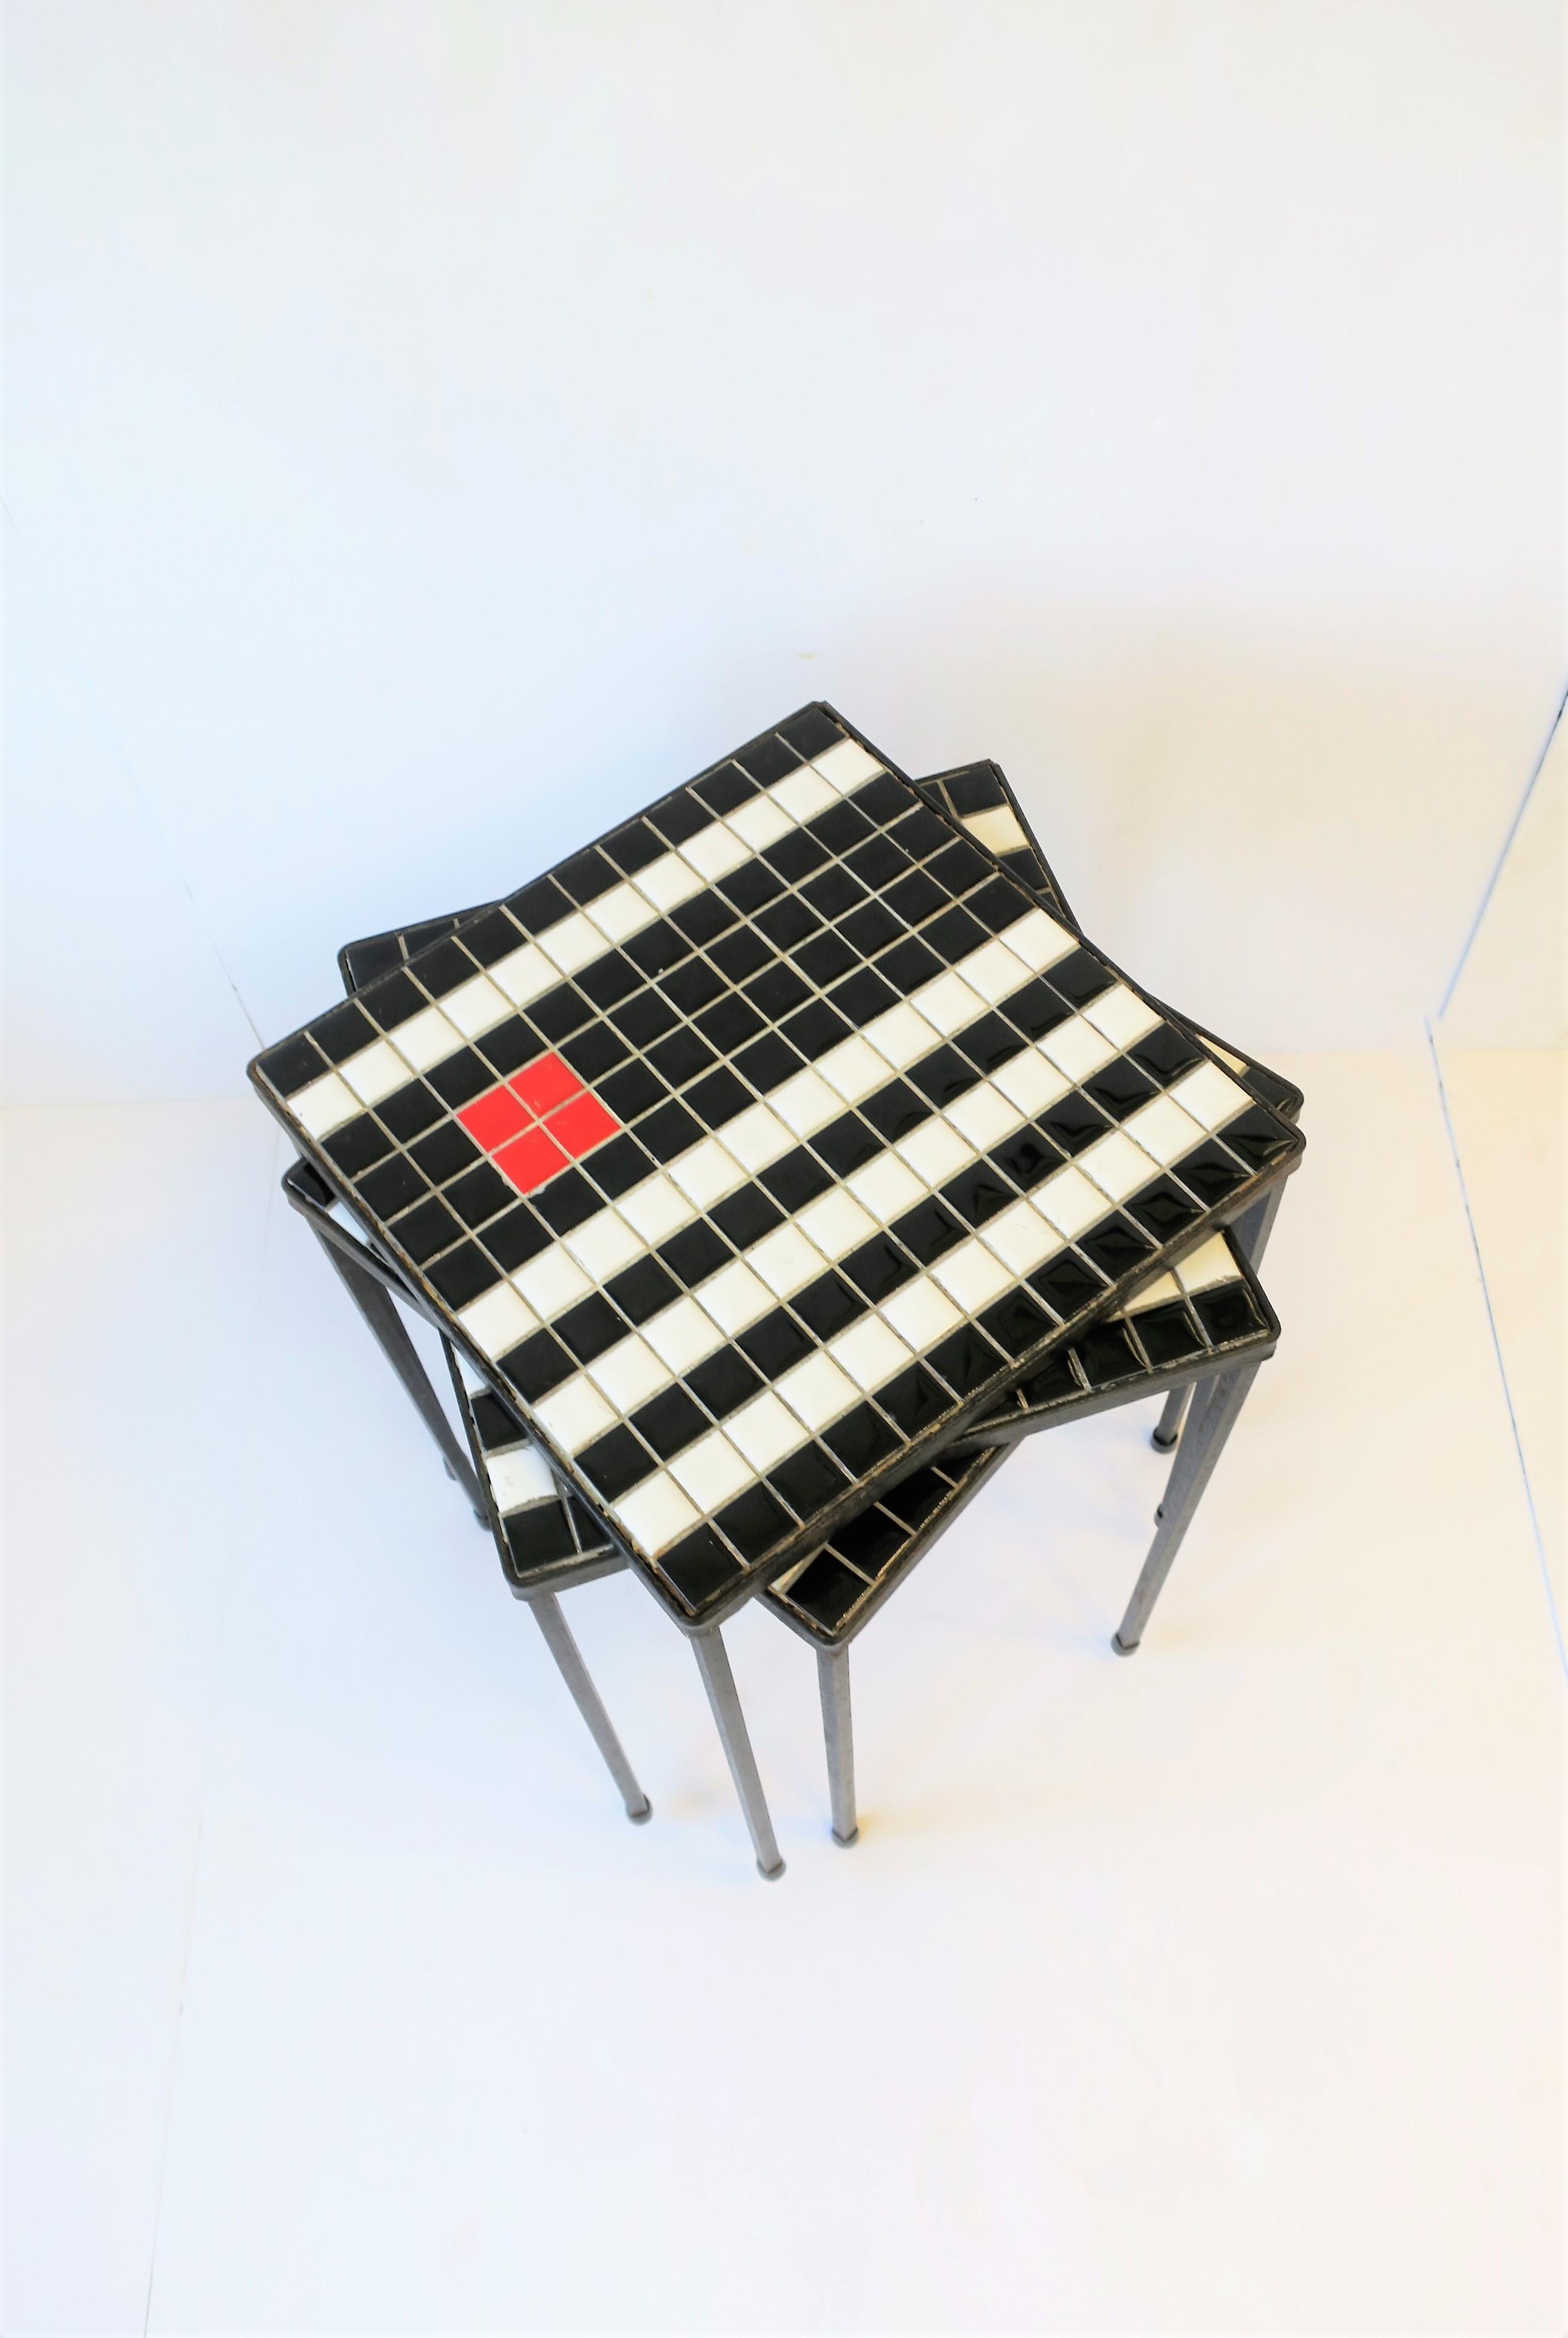 20th Century Midcentury Modern Black and White Mosaic Tile Stacking or Side Tables